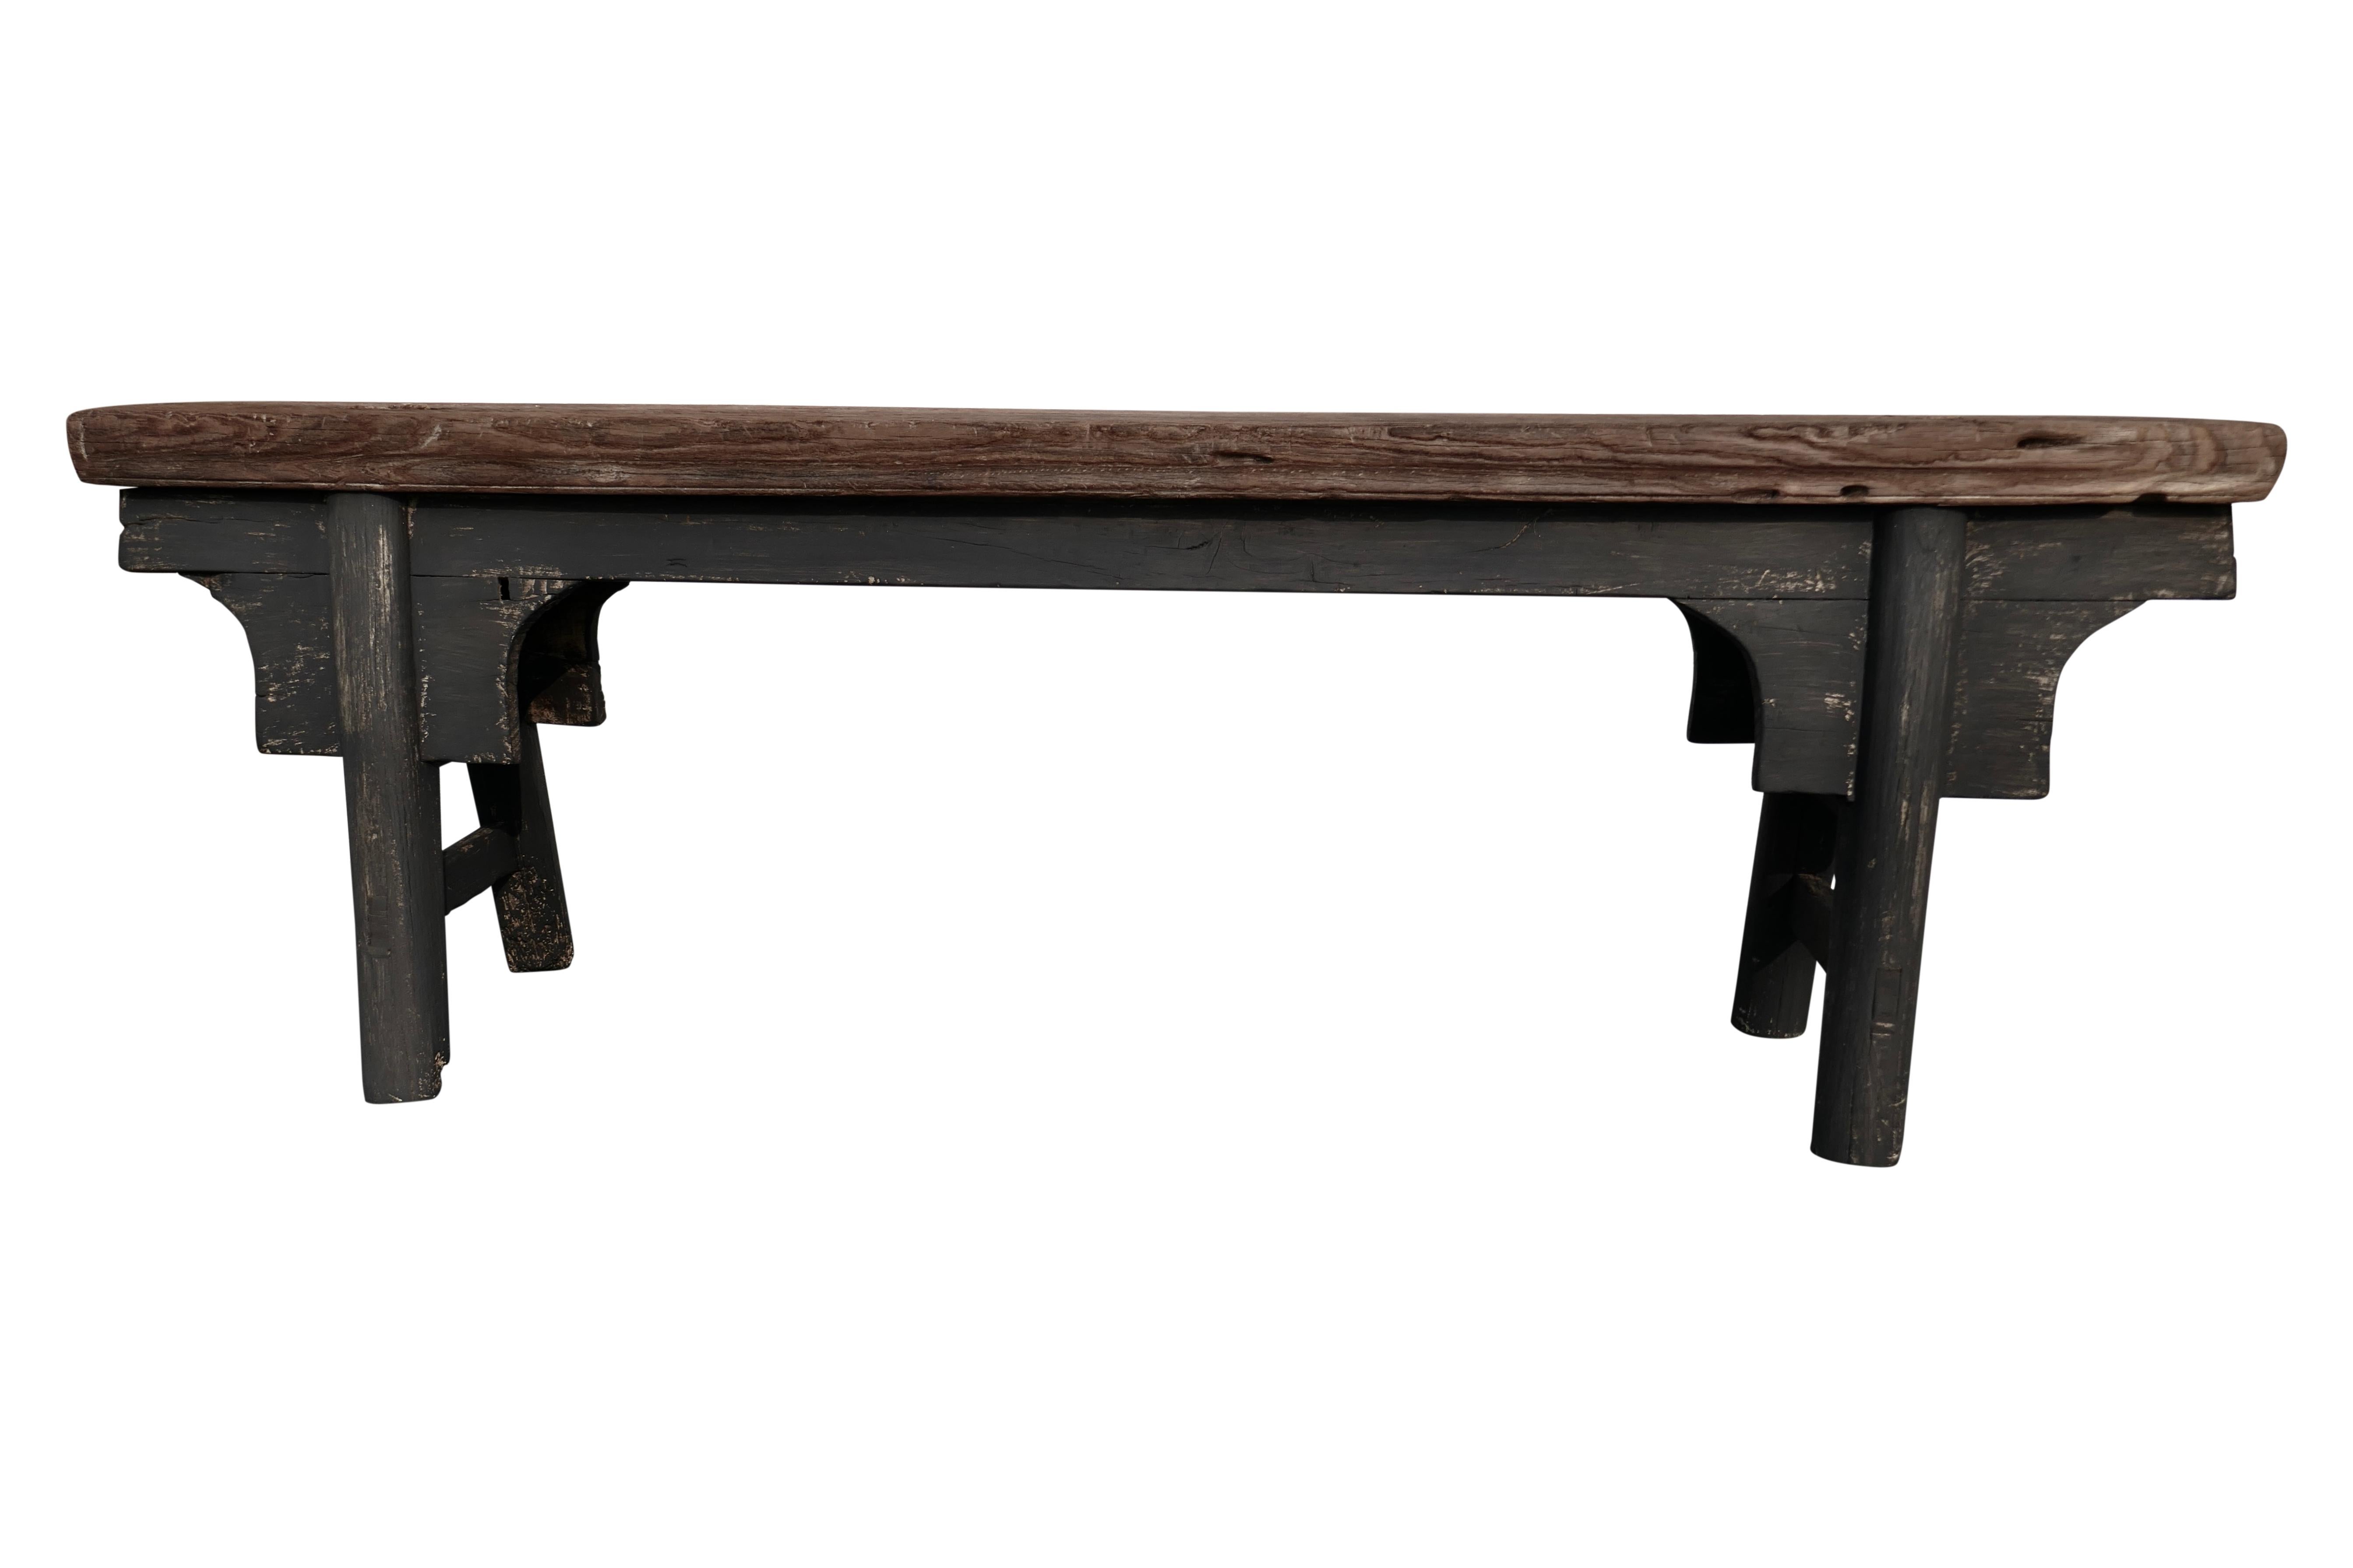 From our collection, a one-of-a-kind authentic antique Asian Shandong bench. This special unique piece was hand-created fro solid heavy elmwood, constructed together by early mortise & tenon joinery. The extra thick carved top show's amazing natural